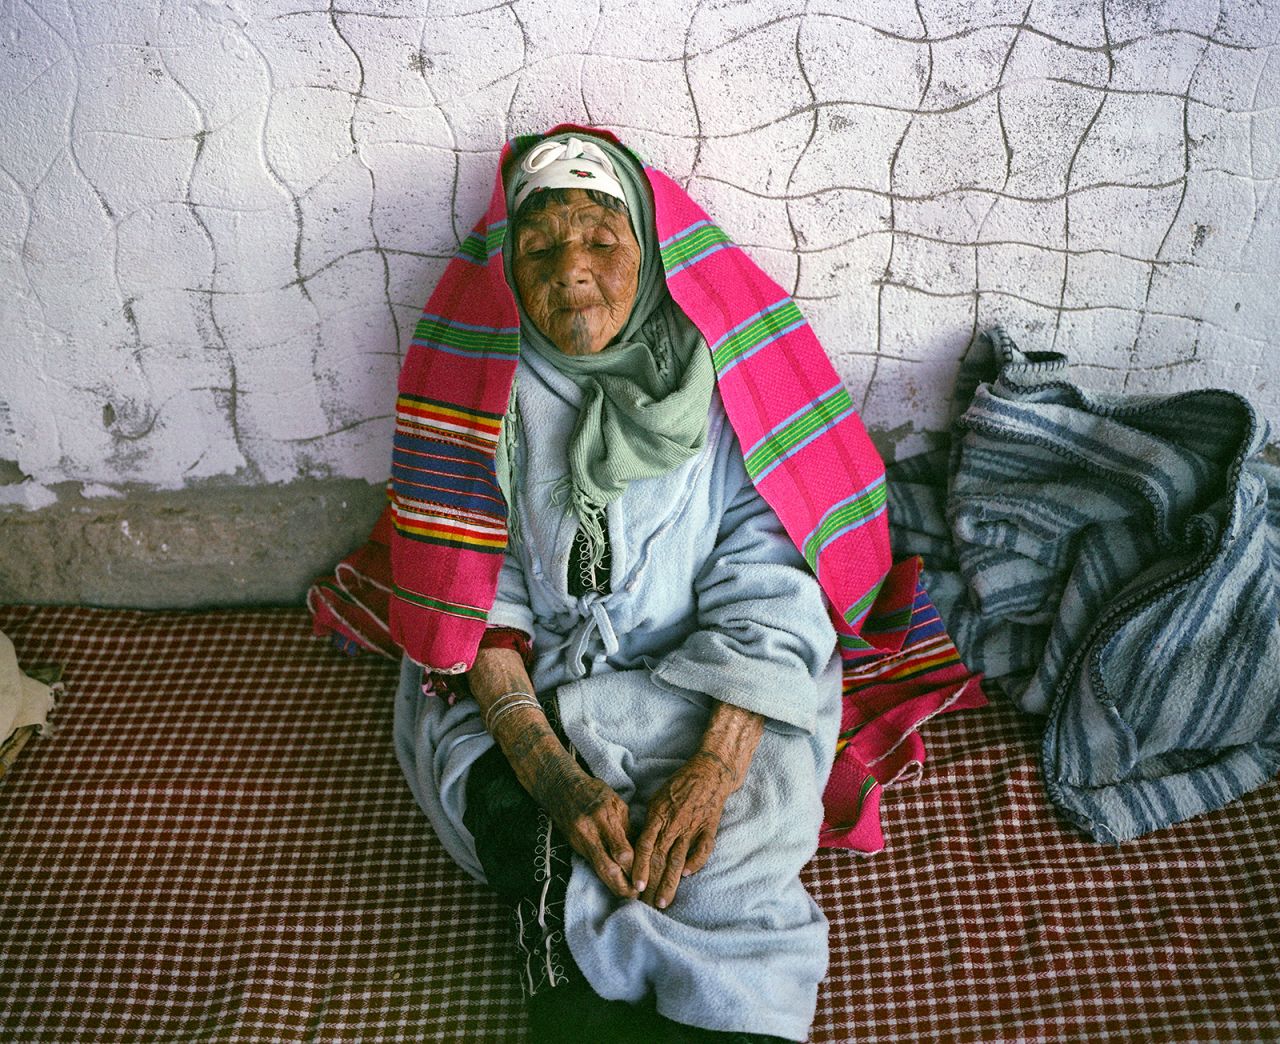 An elderly woman in Matmata, Tunisia, told Al-Arashi that she yearned to get tattooed from a young age.